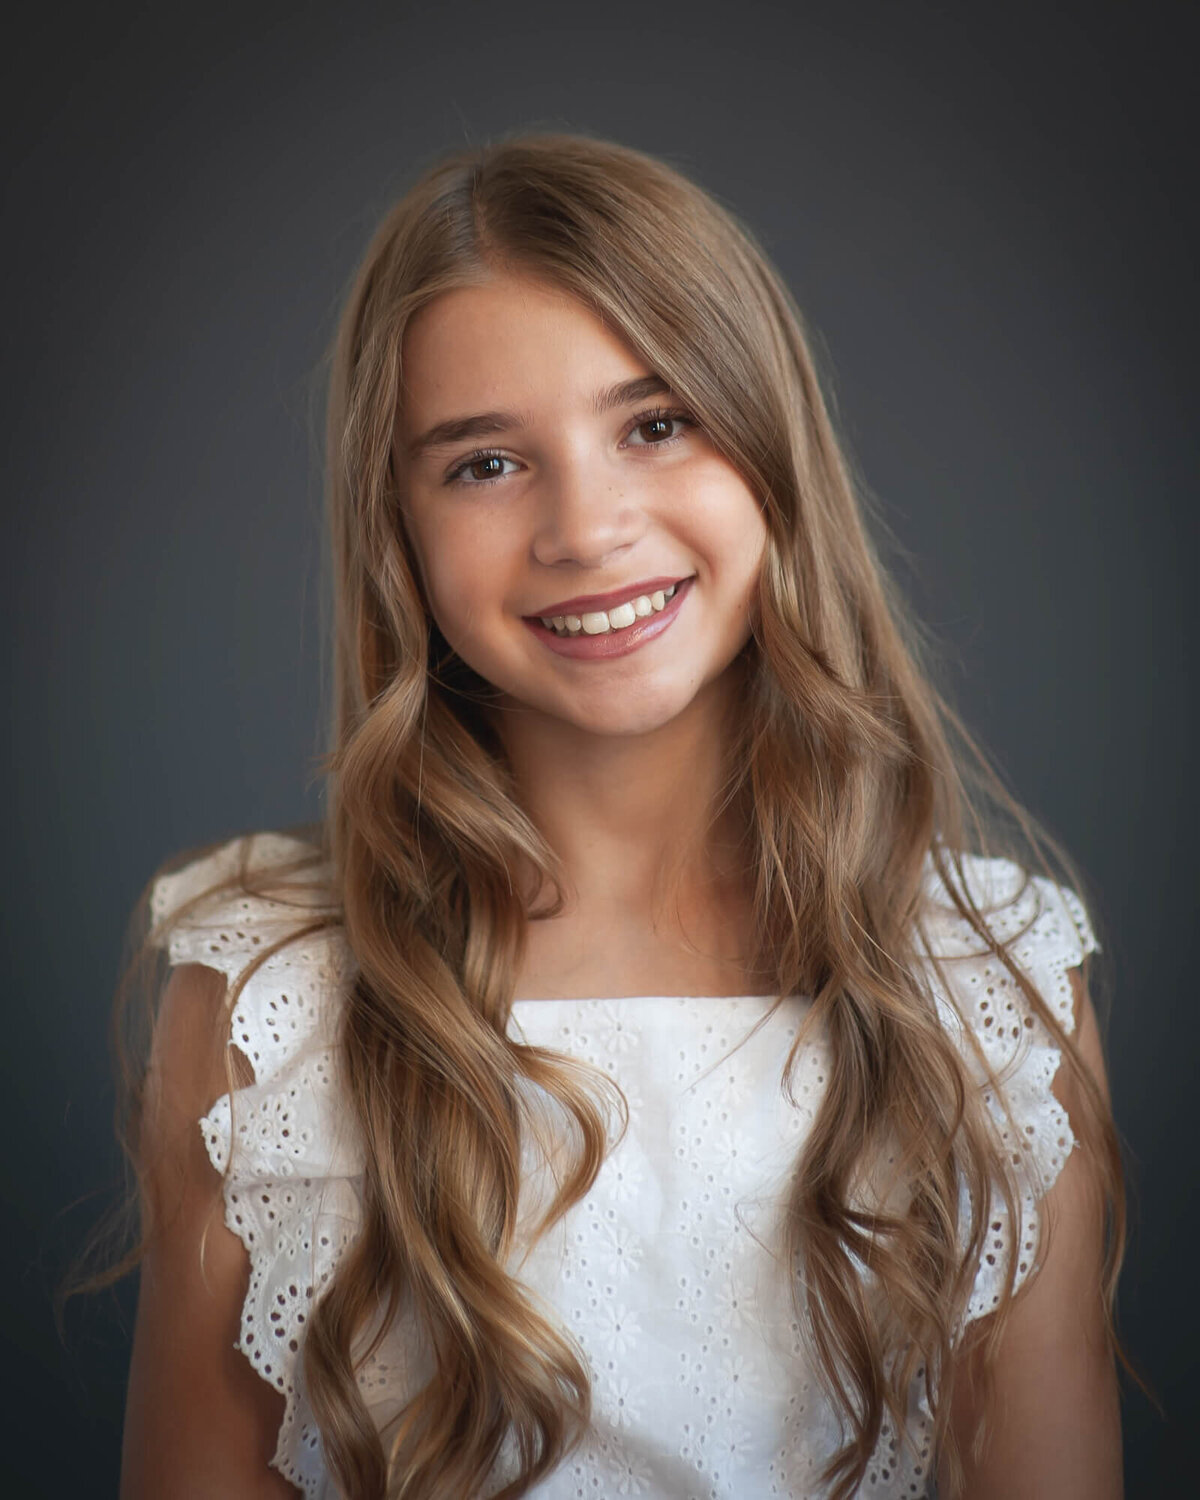 Sweet 10 year old girl smiling wearing white shirt with a dark grey background